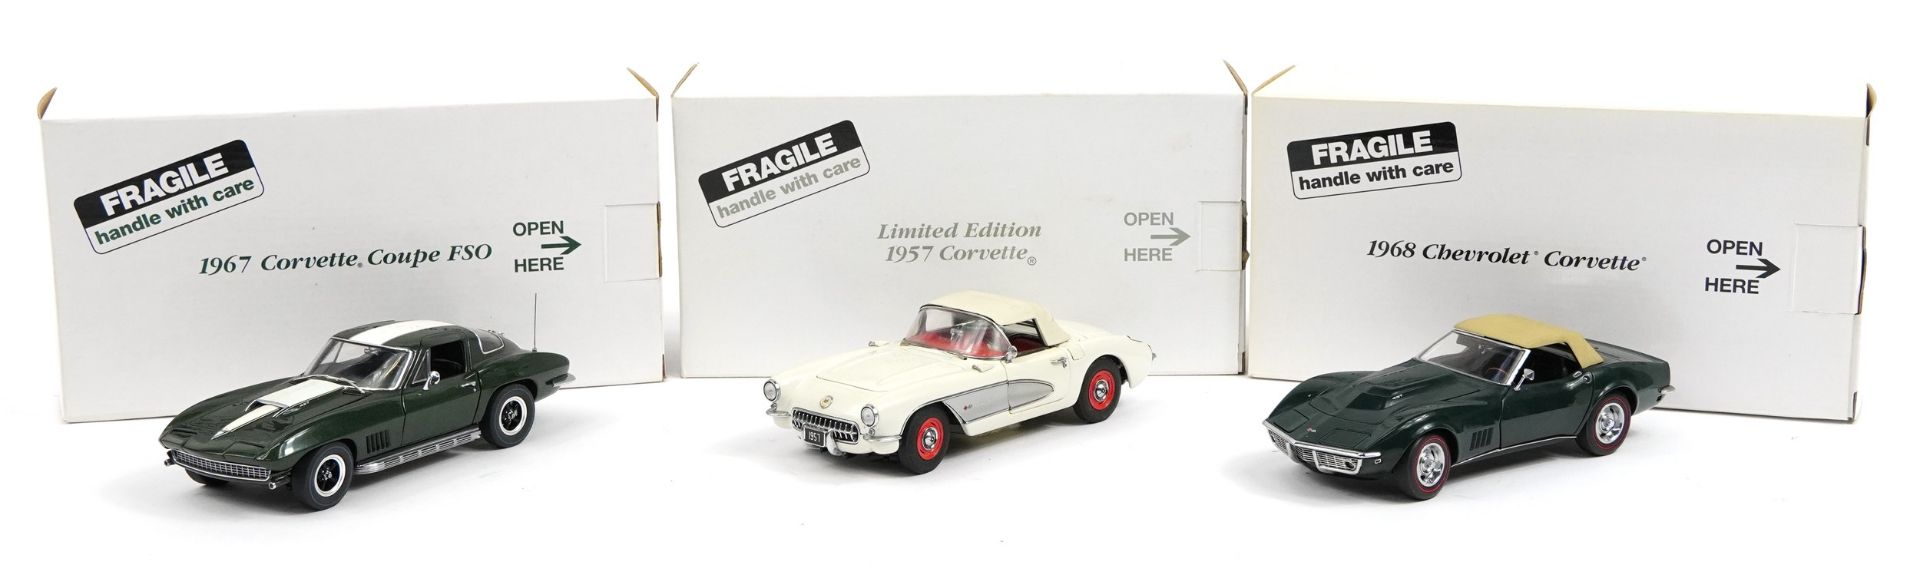 Three Frankin Mint Corvette diecast Precision vehicles with boxes comprising limited edition 1957